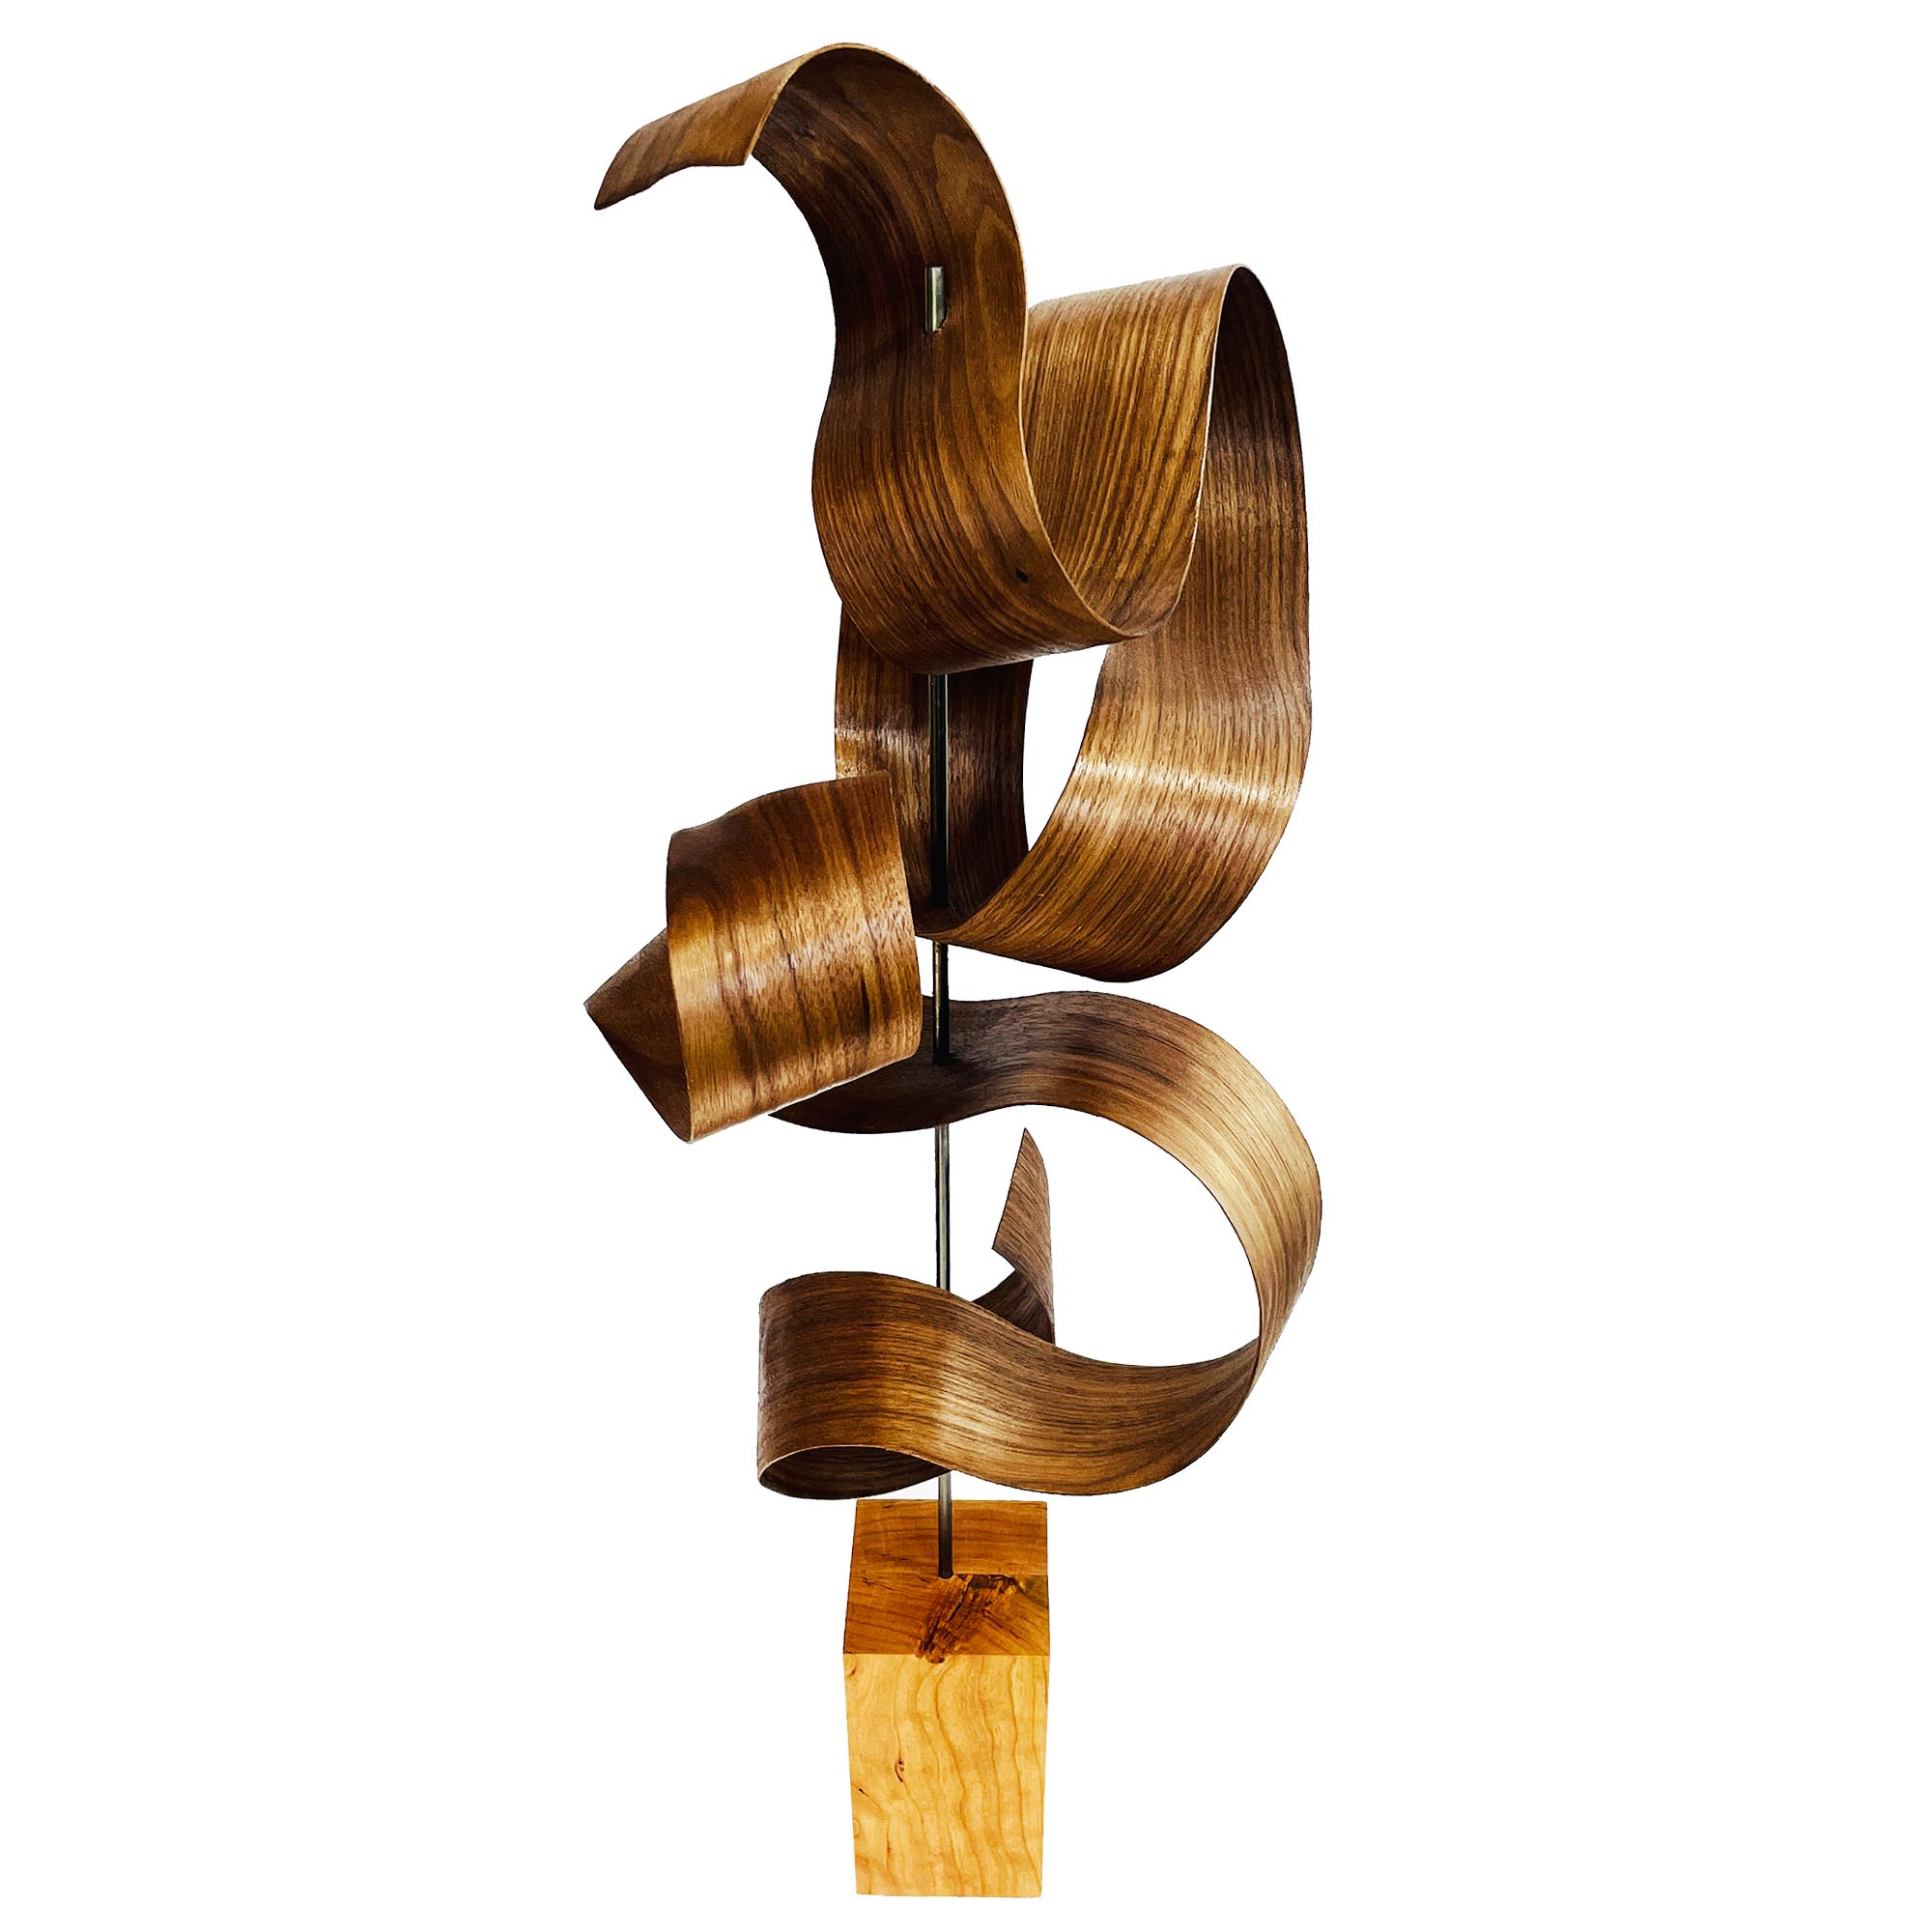 Wave Cherry by Jackson Wright - Abstract Wood Sculpture, Kinetic Sculpture - Image 3